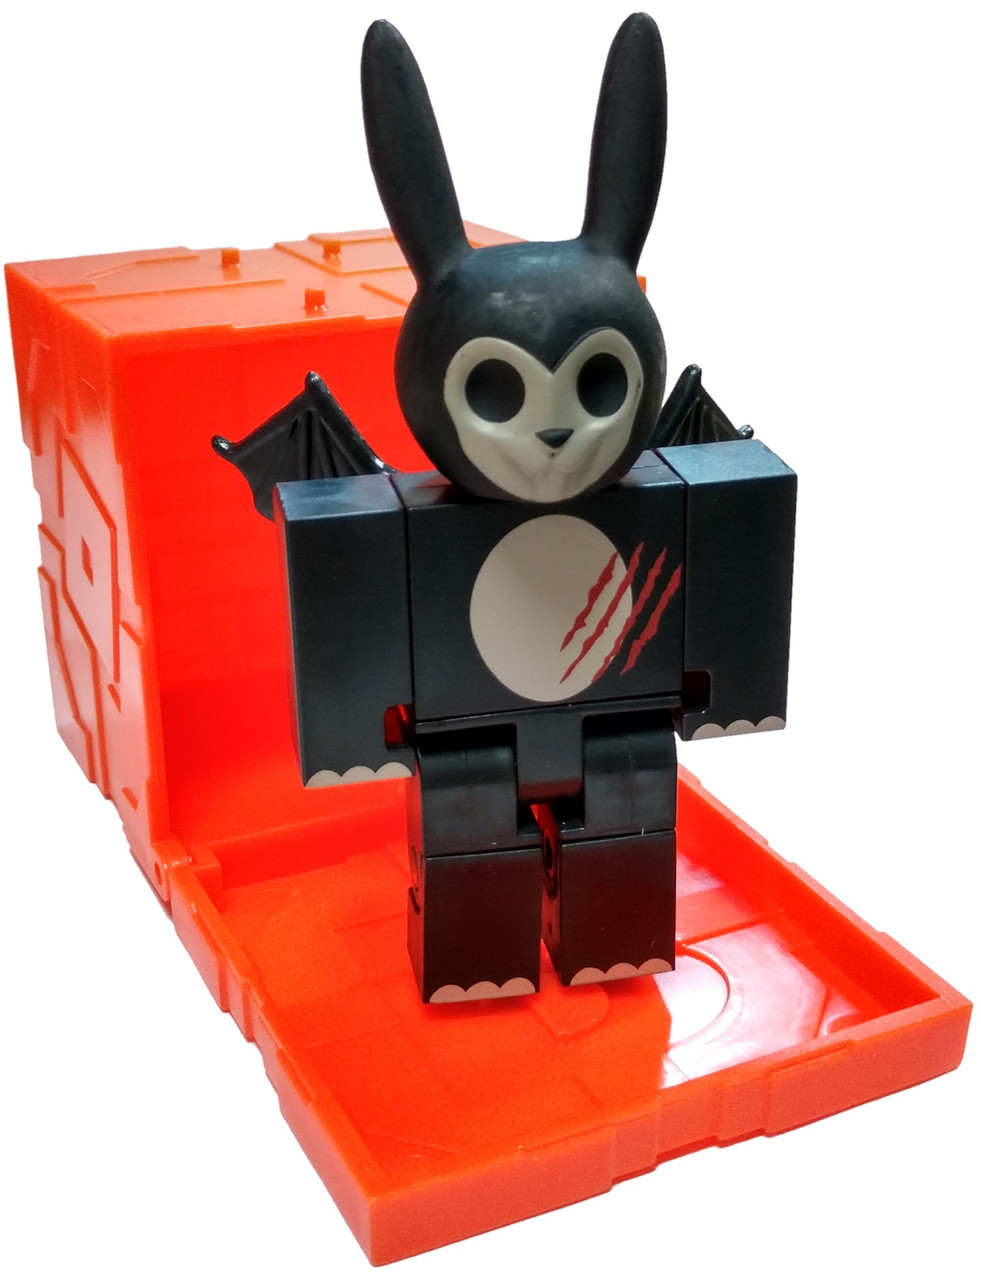 Roblox Series 6 Hunted Zombie Bunny 3 Mini Figure With Orange Cube And Online Code Loose Jazwares Toywiz